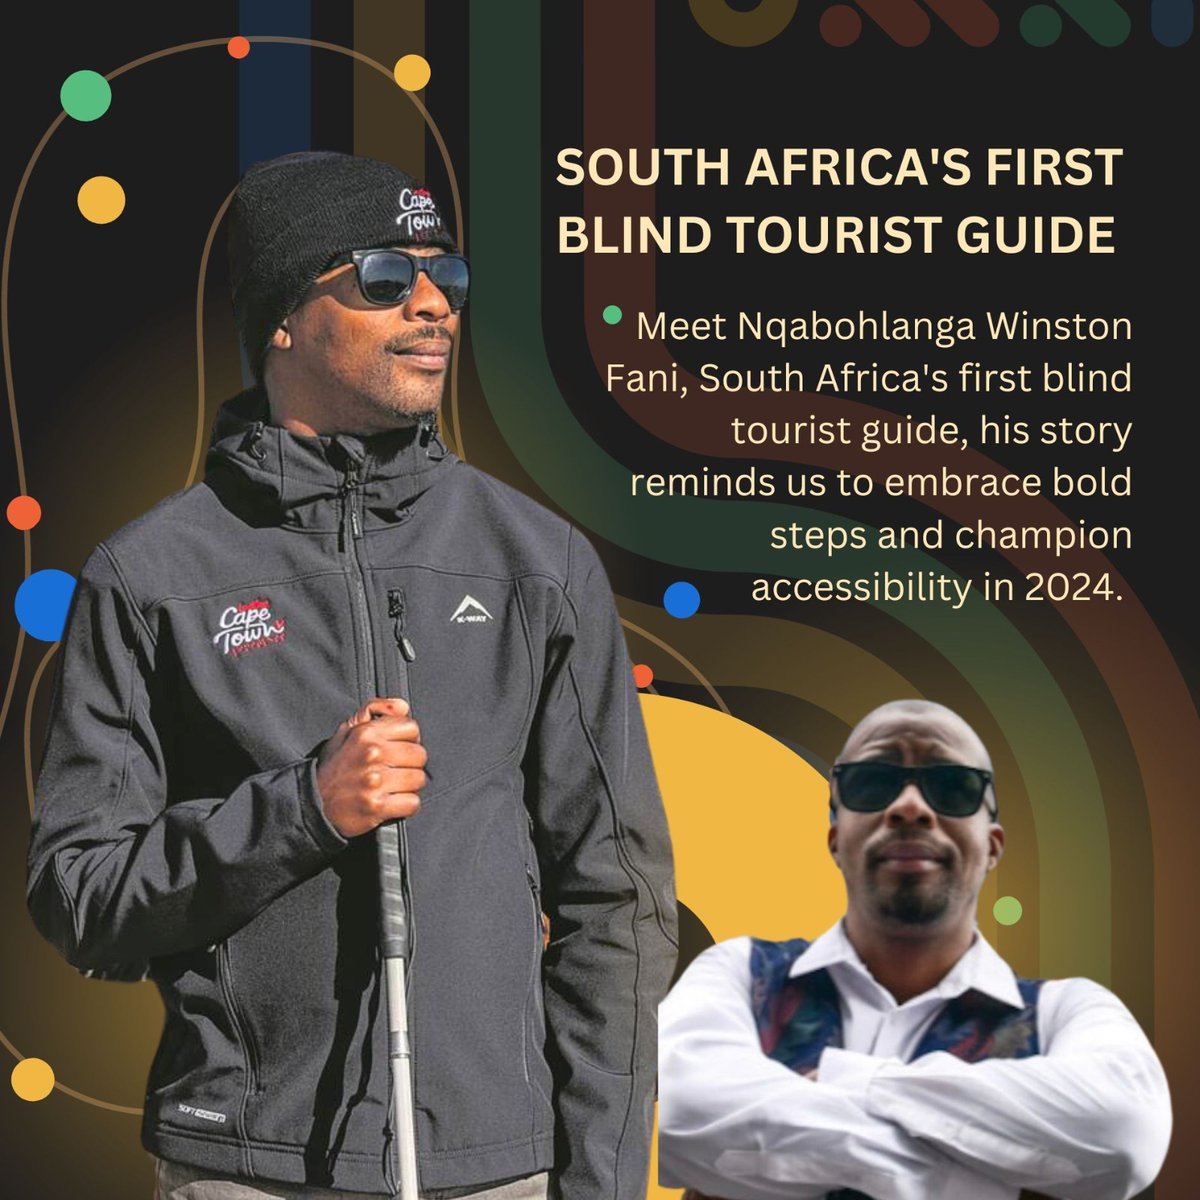 Meet Nqabohlanga Winston Fani, South Africa's first blind tourist guide. 

His story is a beacon of bravery and inclusivity, reminding us to embrace bold steps and champion accessibility in 2024. 

#InclusiveTourism #BreakingBarriers 
#MotherlandOMNi